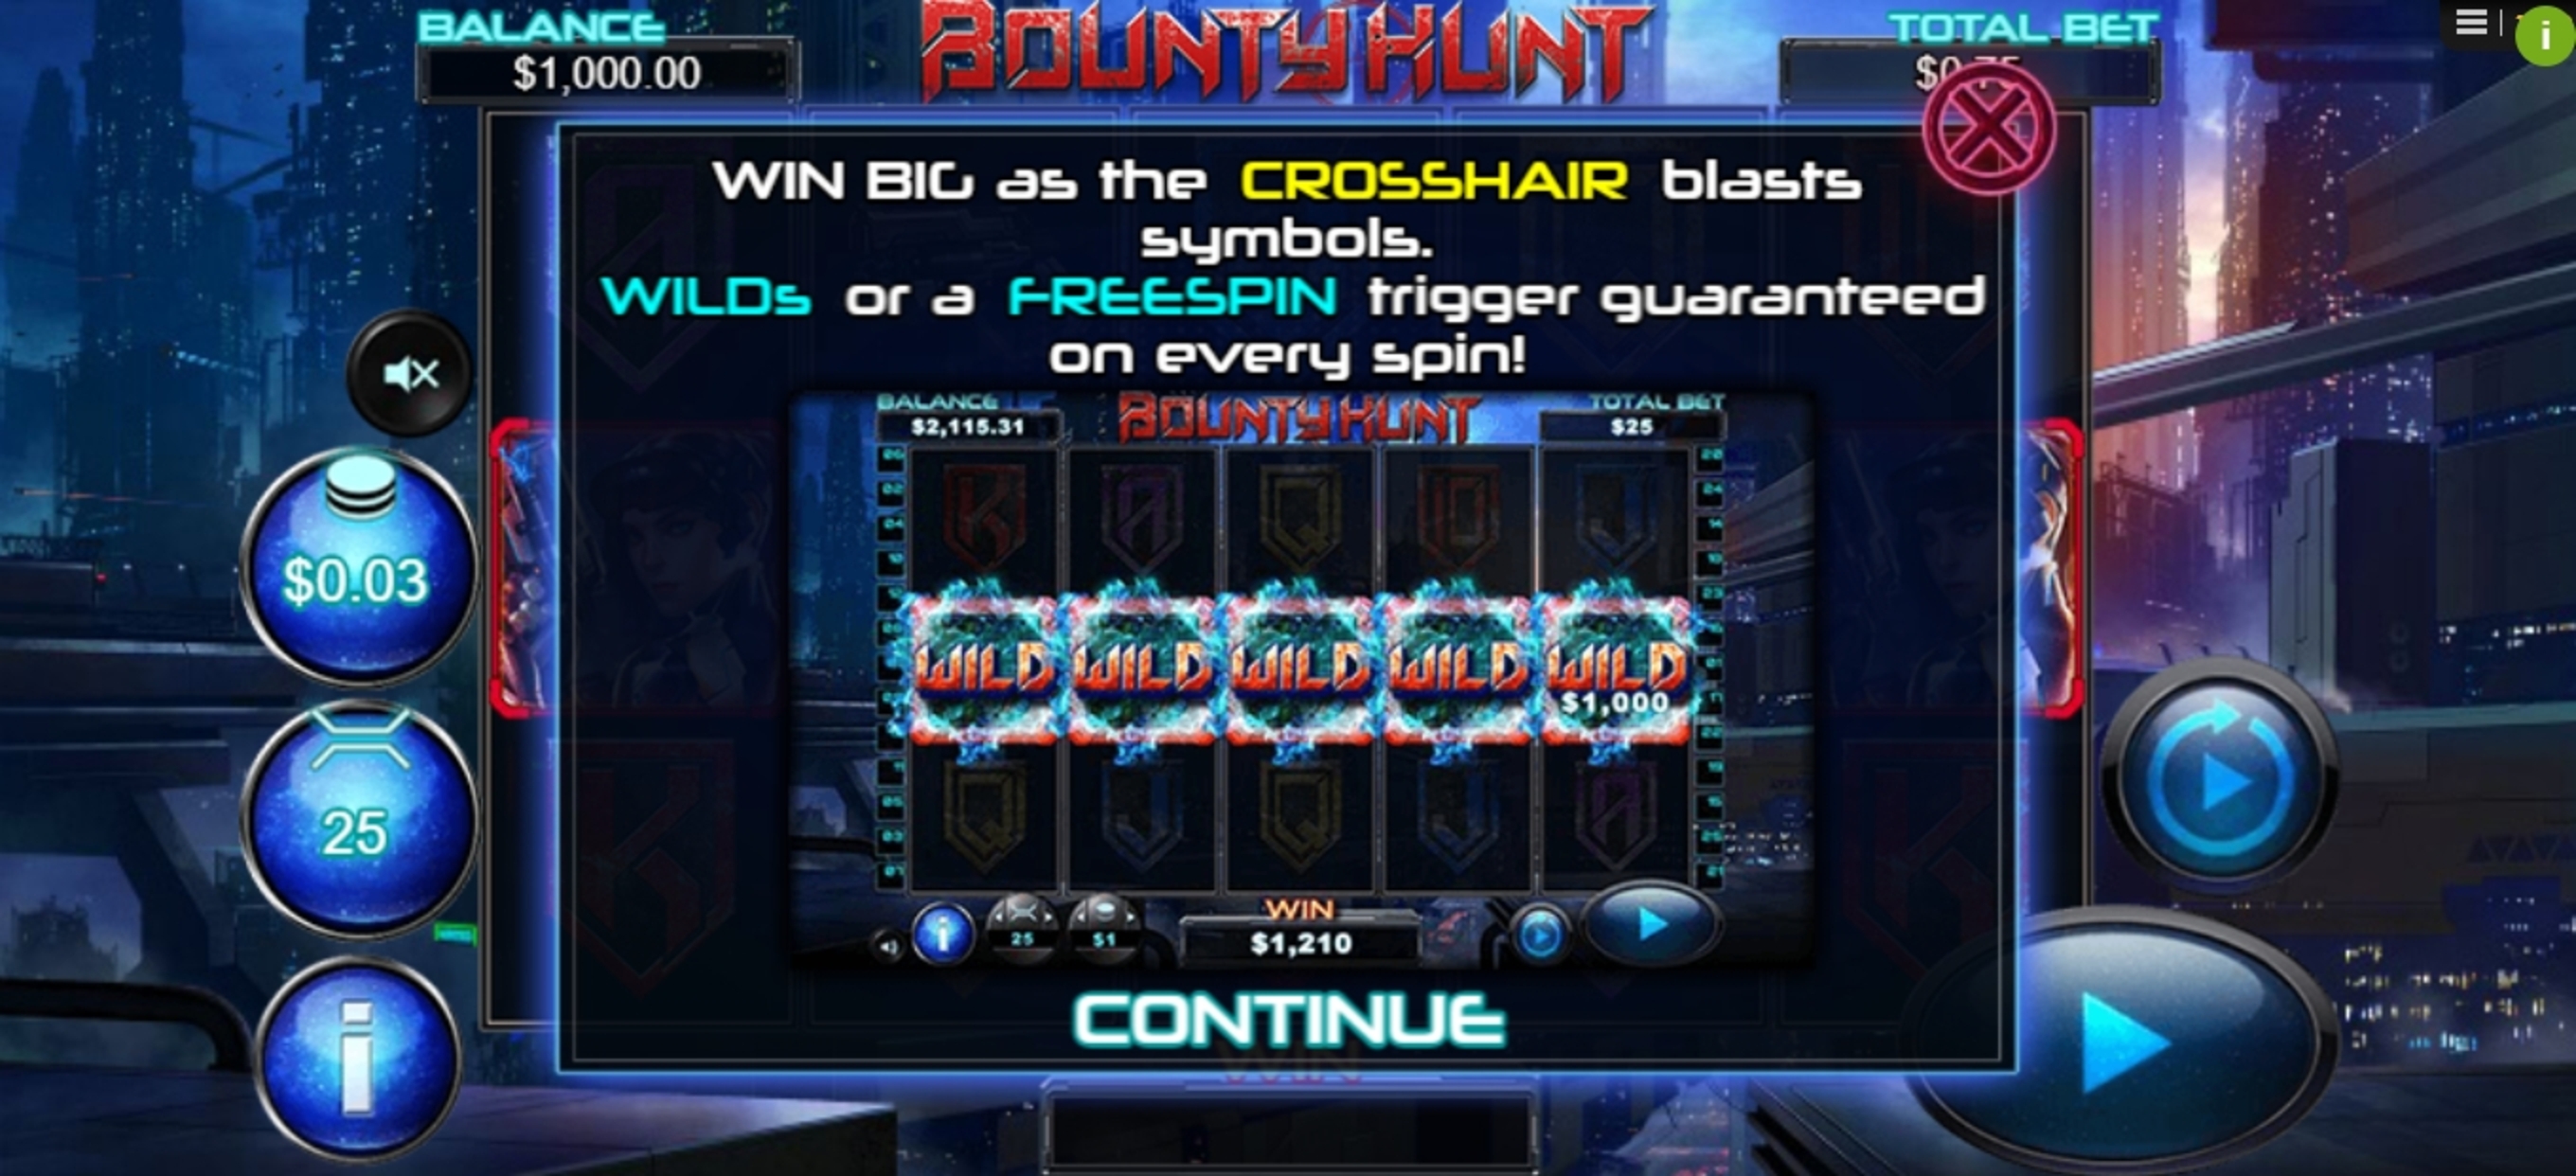 Play Bounty Hunt Free Casino Slot Game by Reel Play